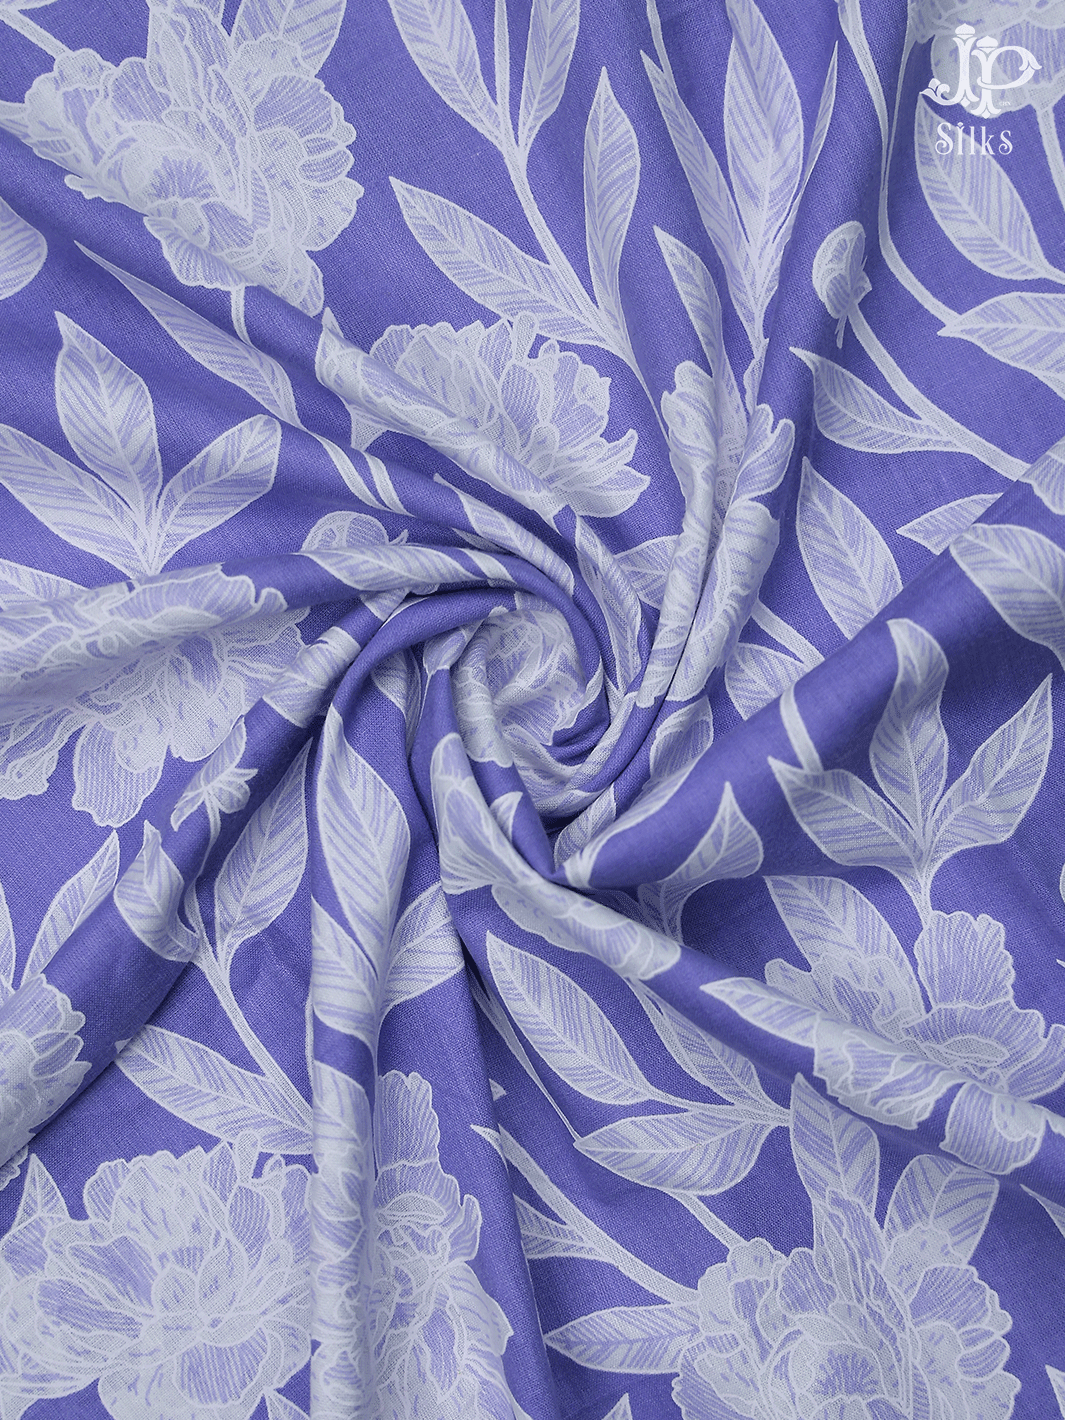 White and Lavender Floral Cotton Chudidhar Material - E6151 - View 1